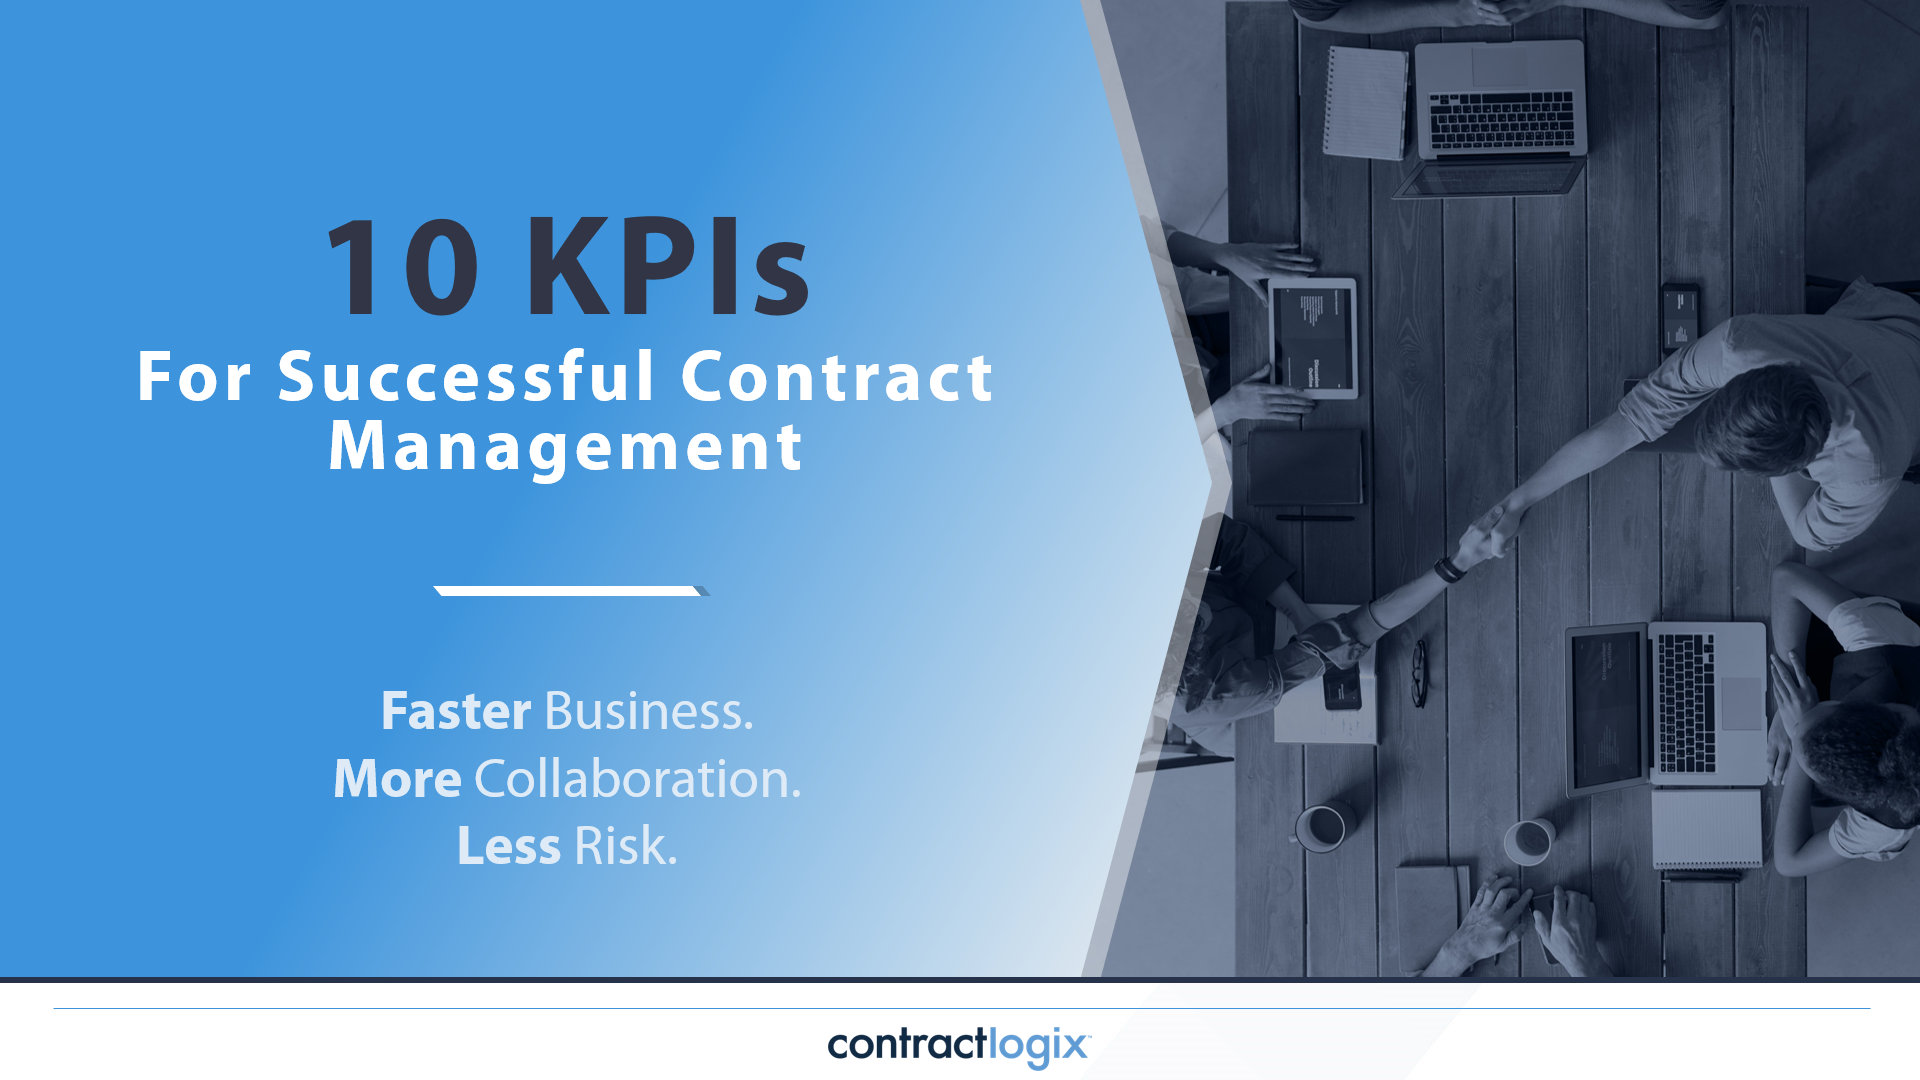 10 KPIs for Successful Contract Management